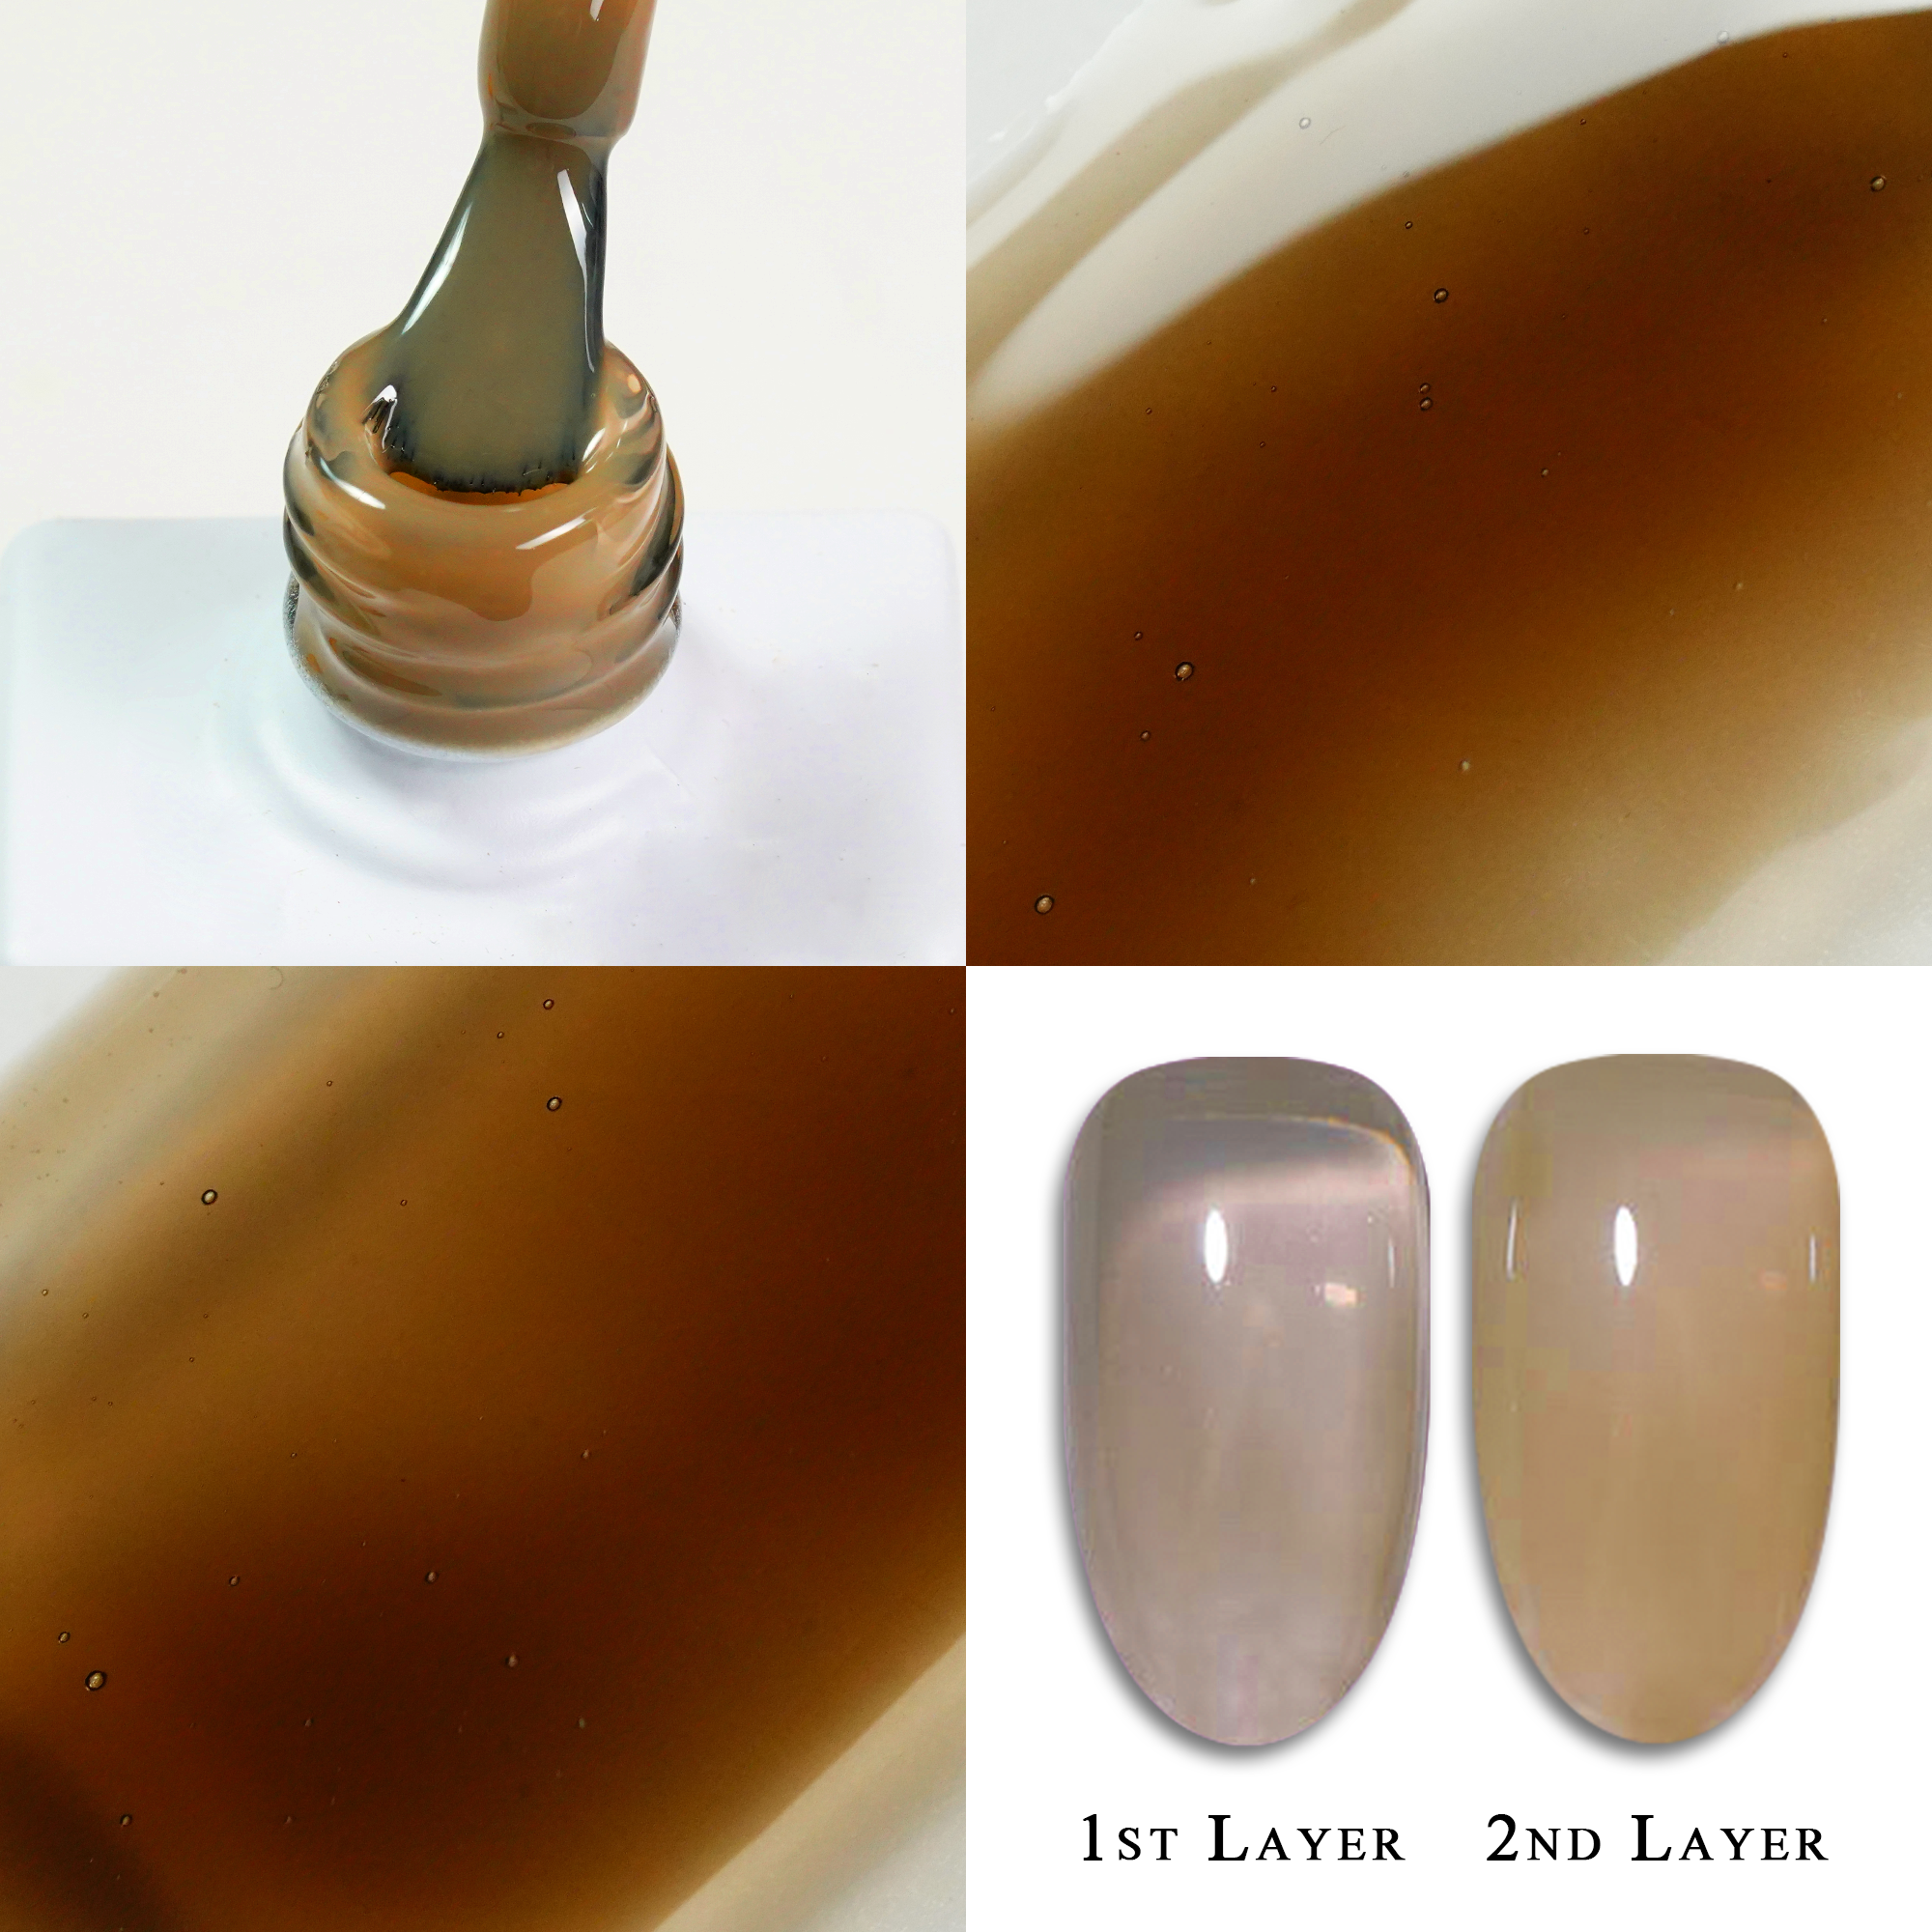 Jelly Gel Polish Colors - Lavis J02-09 - Candy Collection